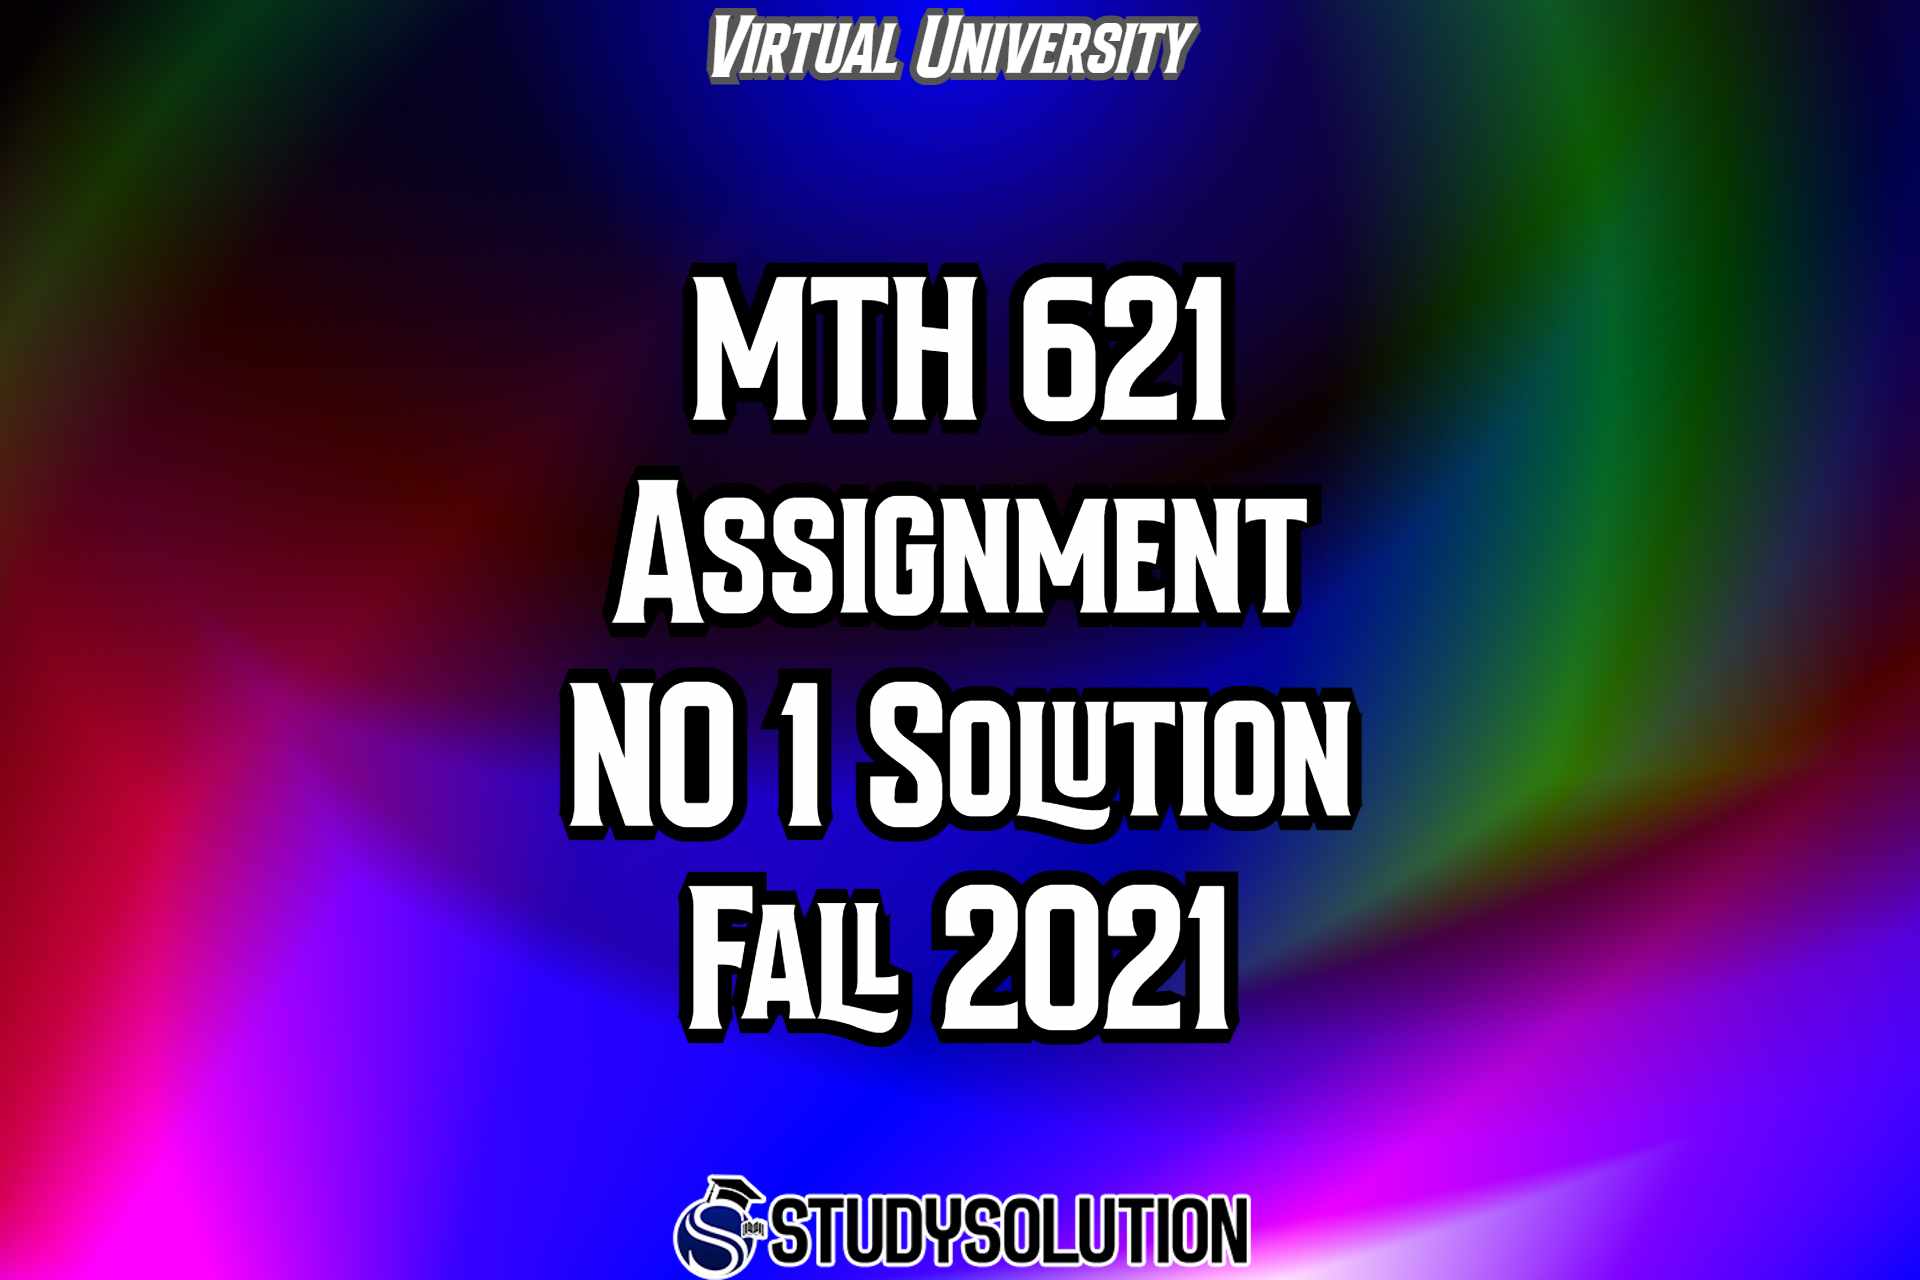 MTH621 Assignment NO 1 Solution Fall 2021